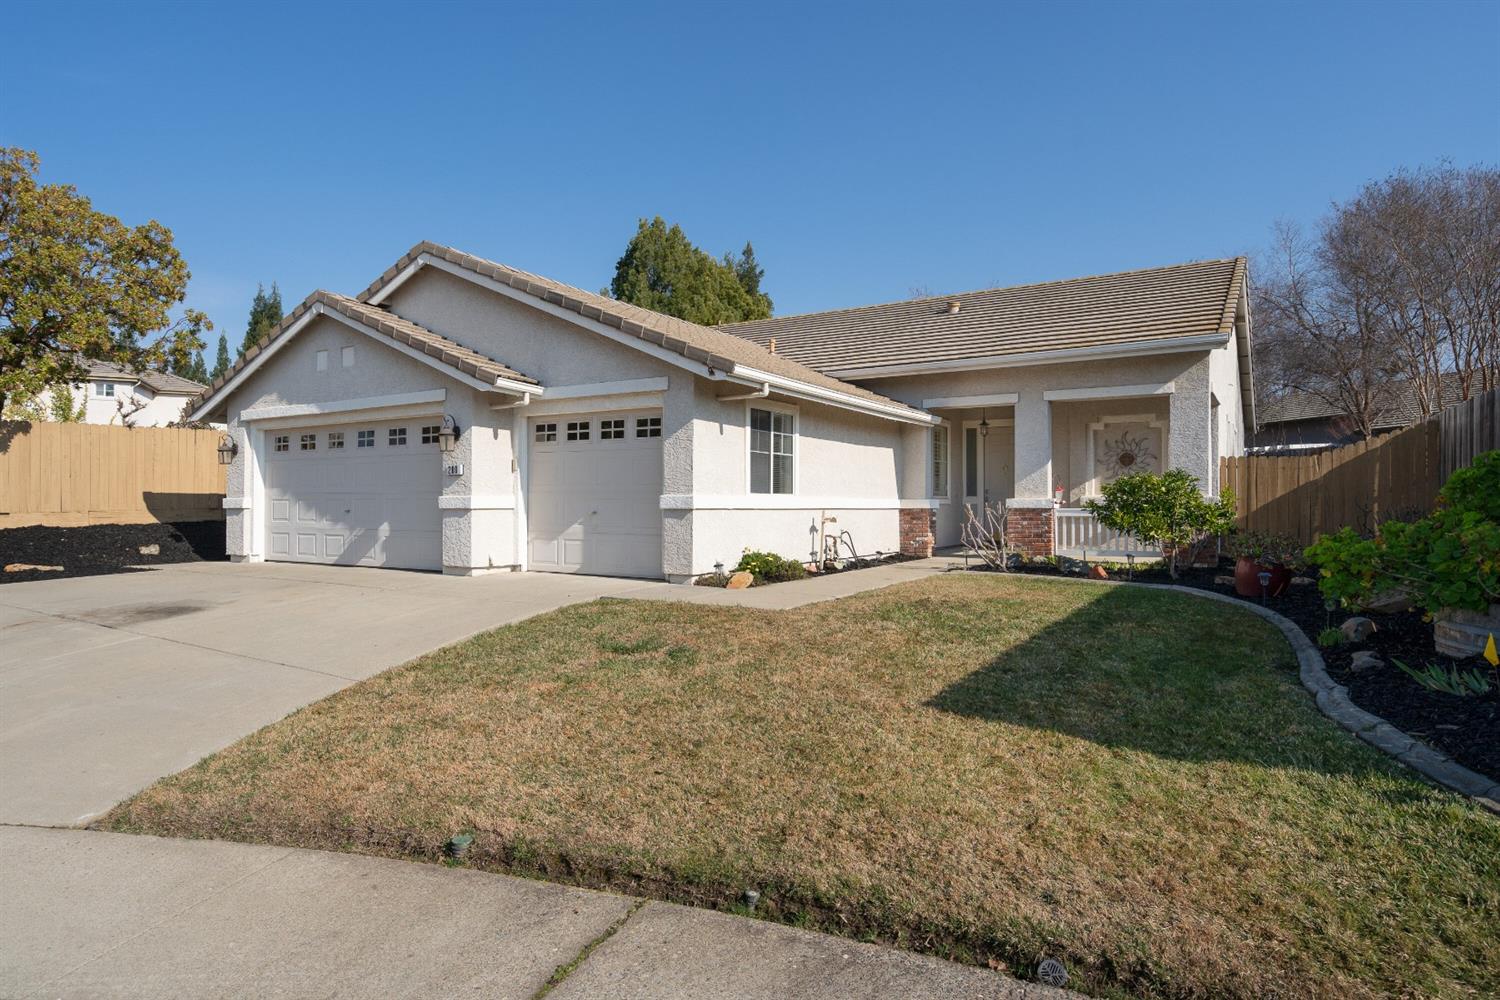 Single Story! Broadstone! Cul-de-Sac!  So many desirable features in this 3 bed, 2 bath Folsom home.